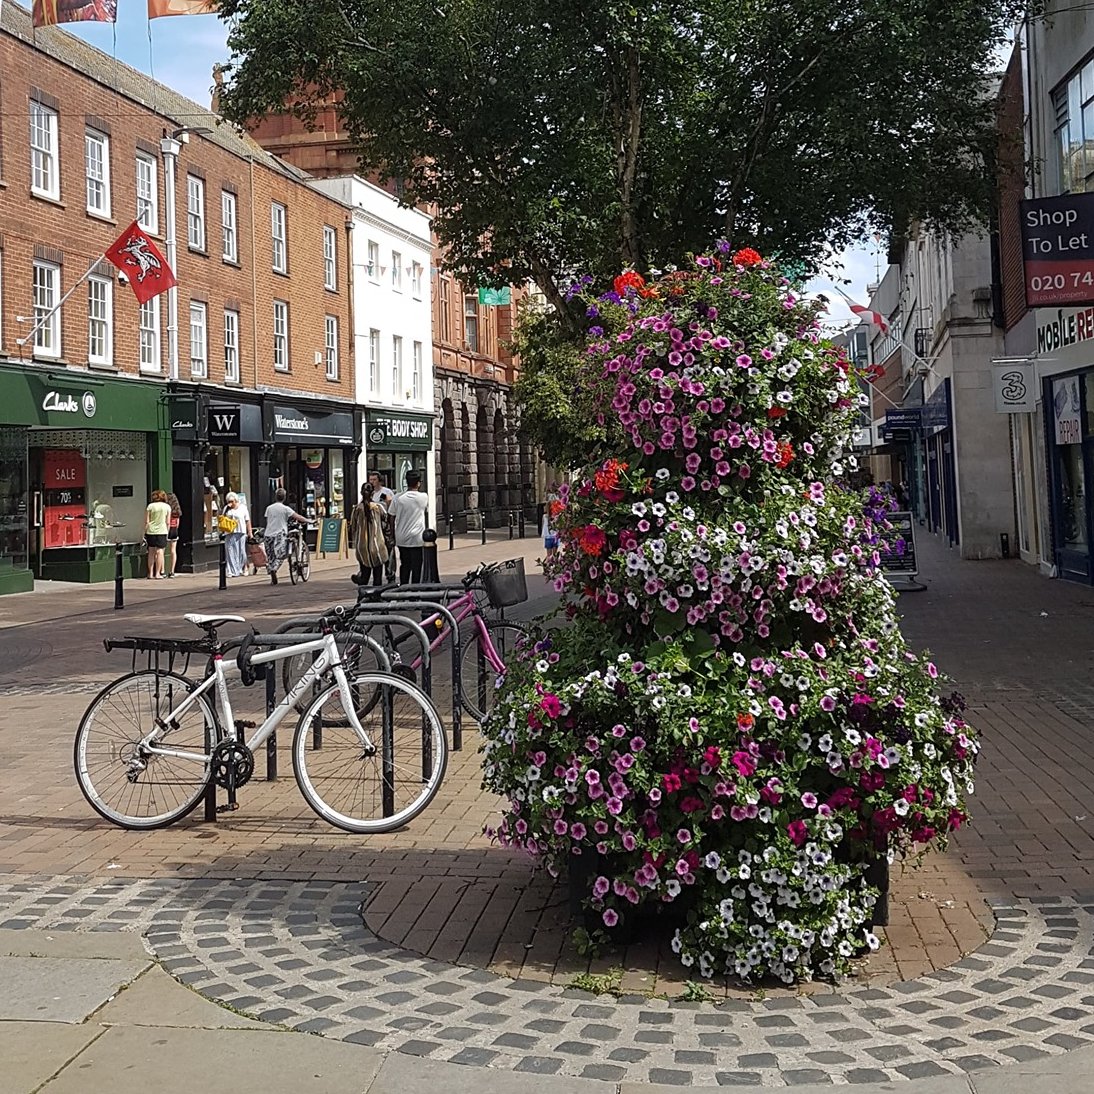 This year we've gone for bee friendly and bold coloured flowers! Adding greenery and pops of colour to the city centre. 🐝🌸🐝🌸🐝🌸🐝 #Gloucester #AttractiveCity